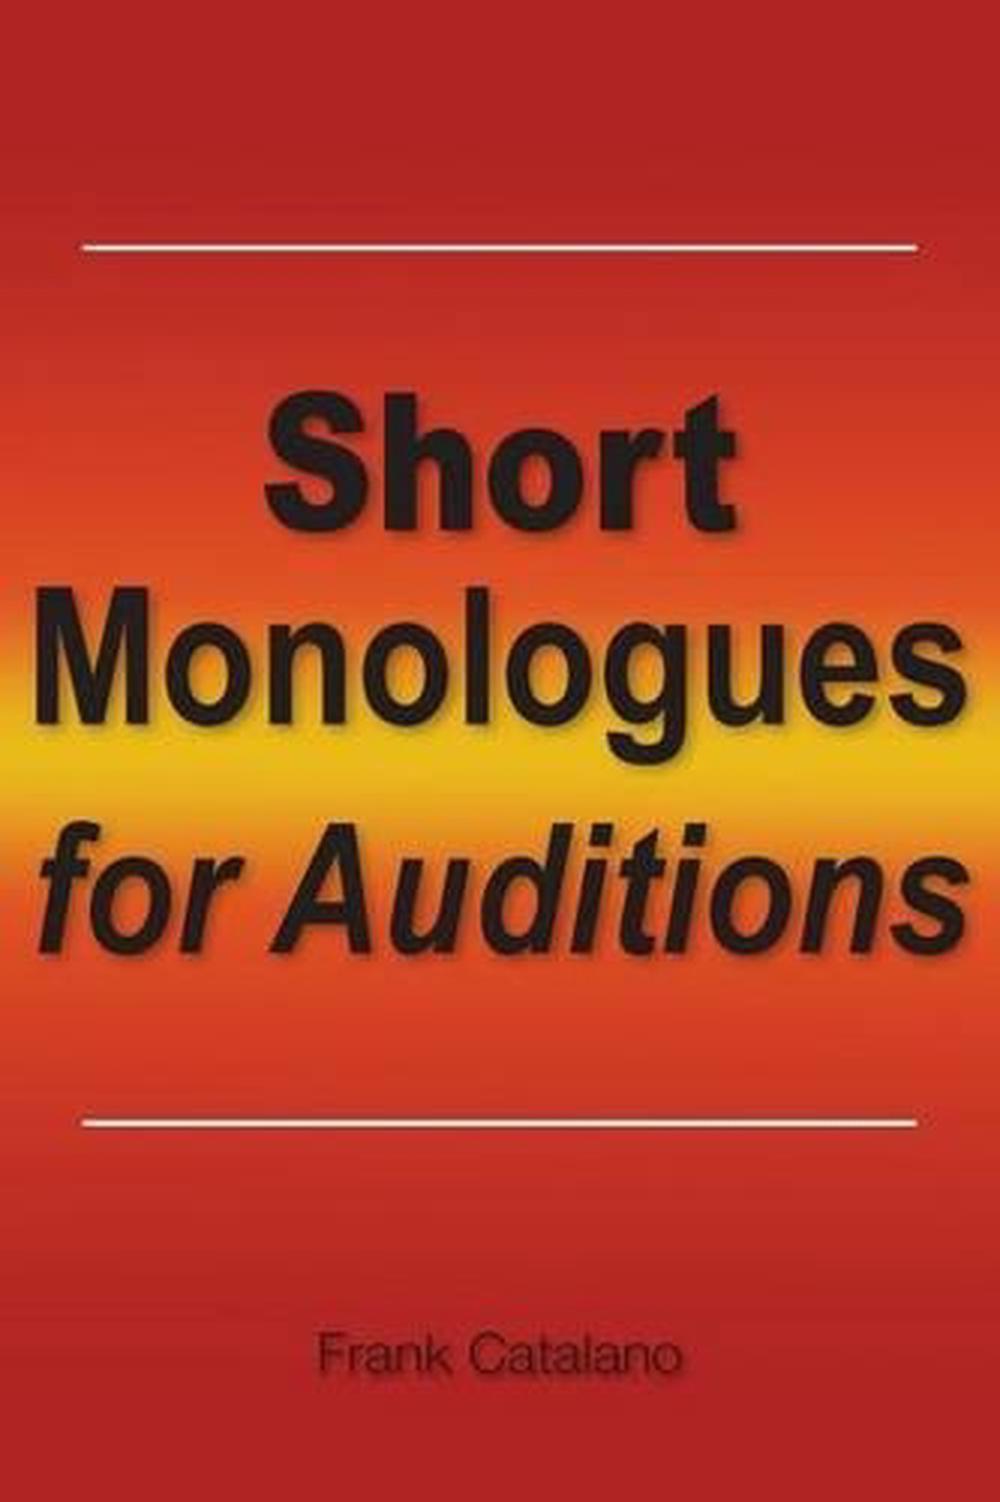 monologue for audition